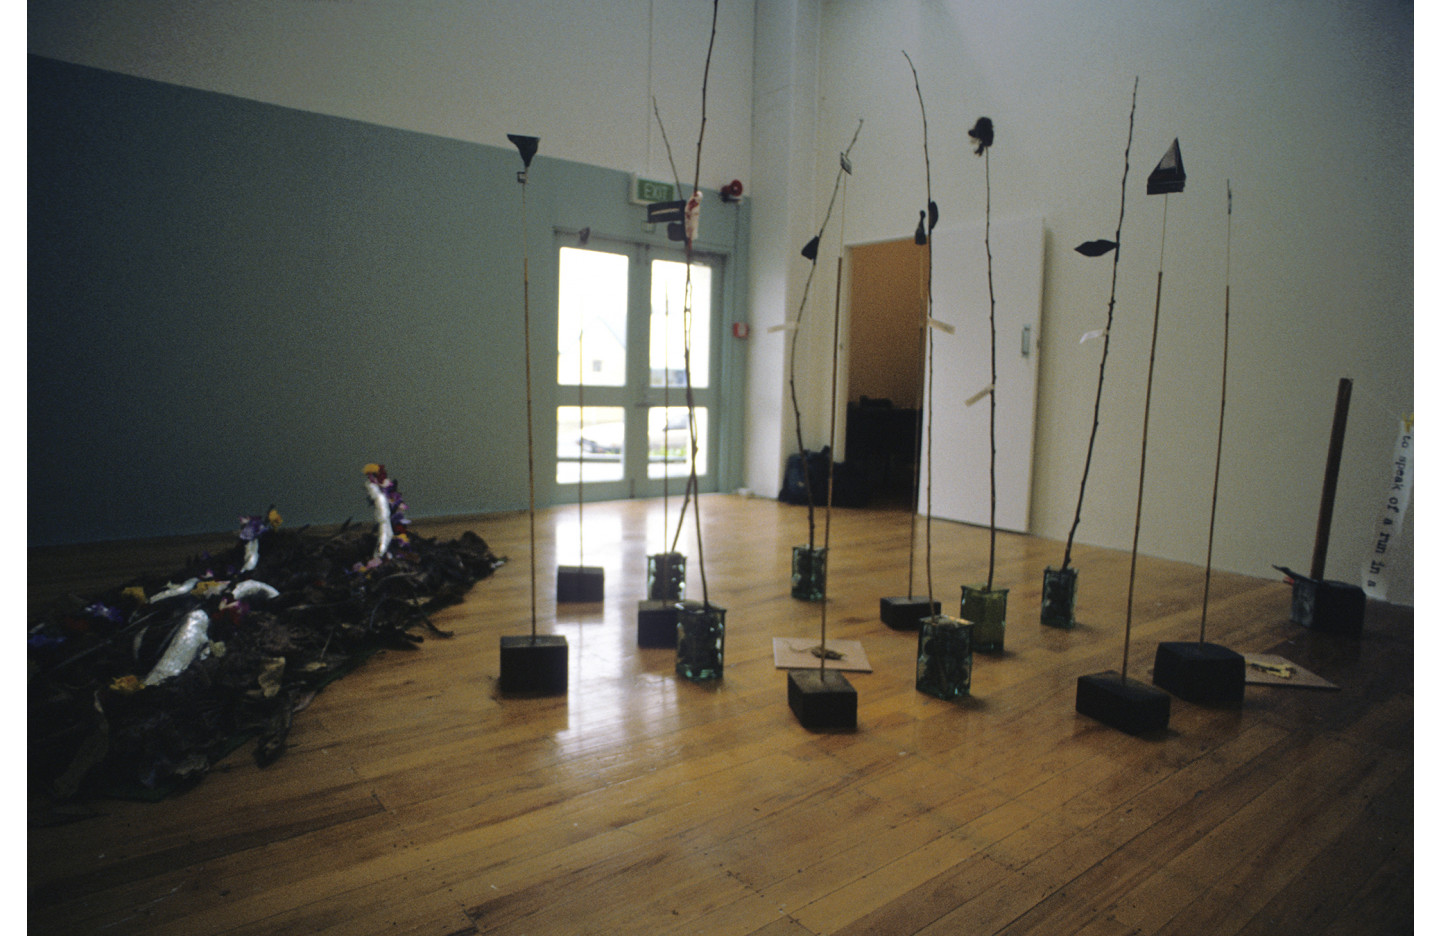 Hanging by a Thread, Ramp Gallery (2000)